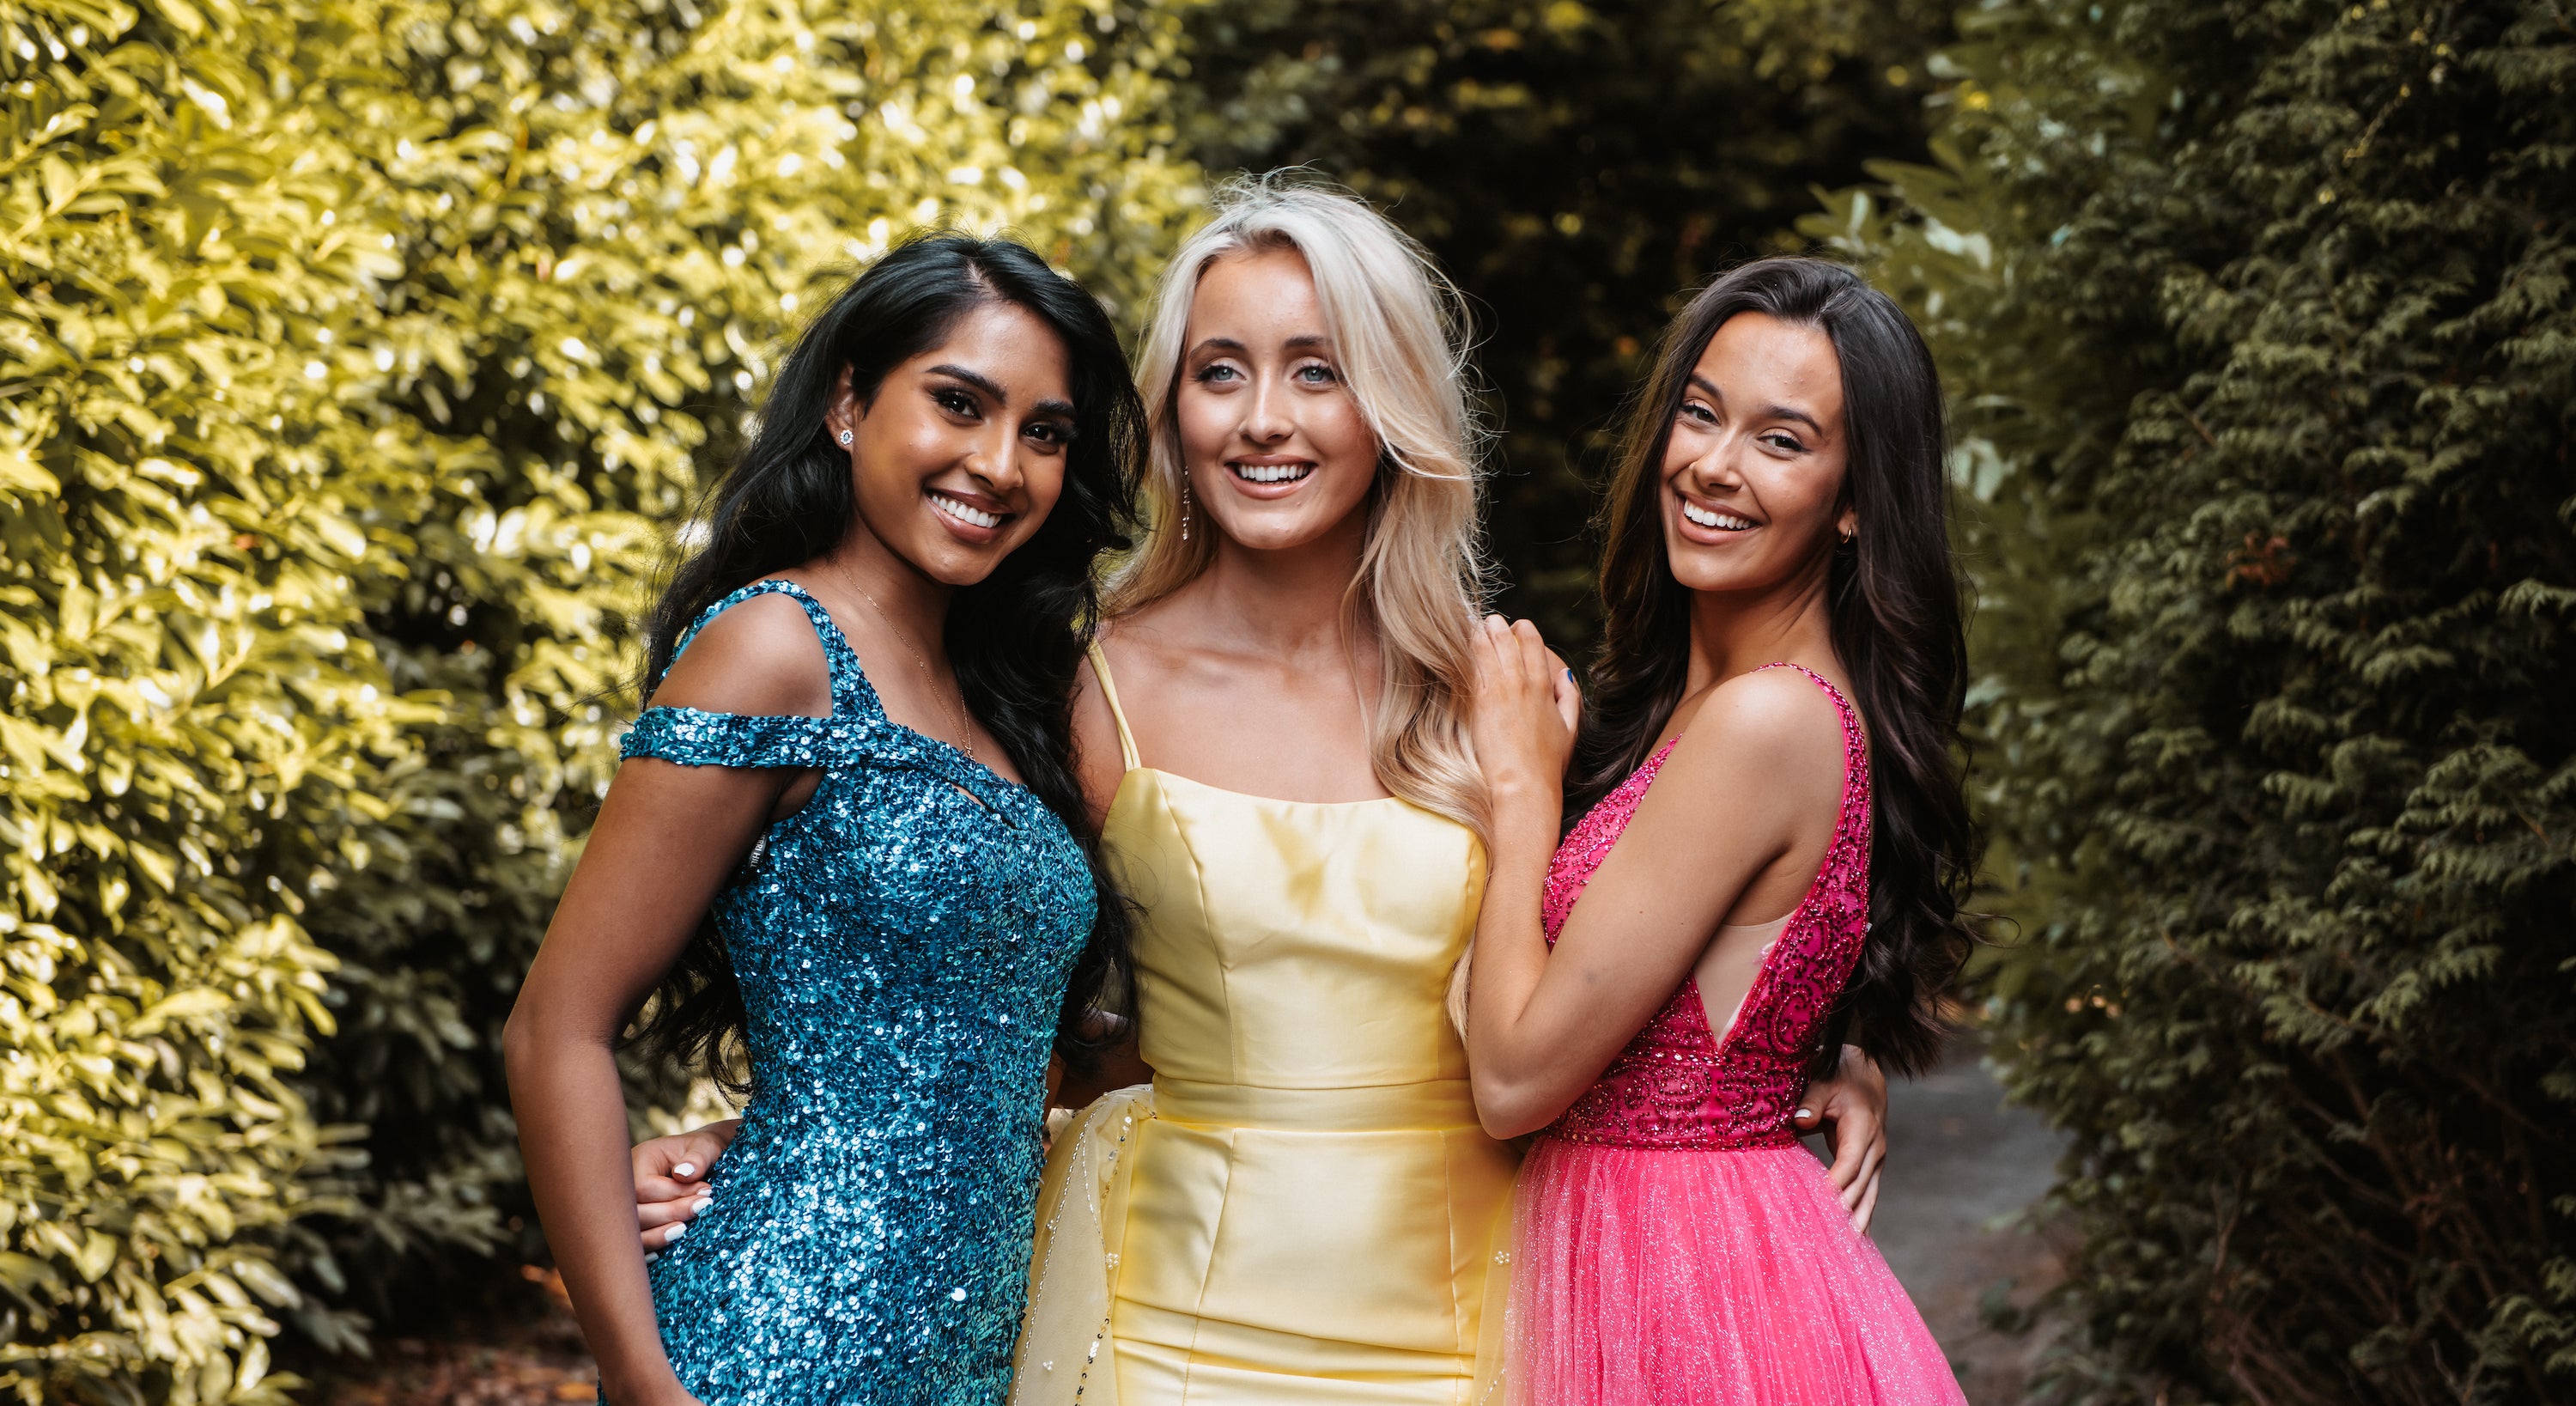 Cheap Formal Dresses For Prom & Wedding Party | OmbreProm UK Online